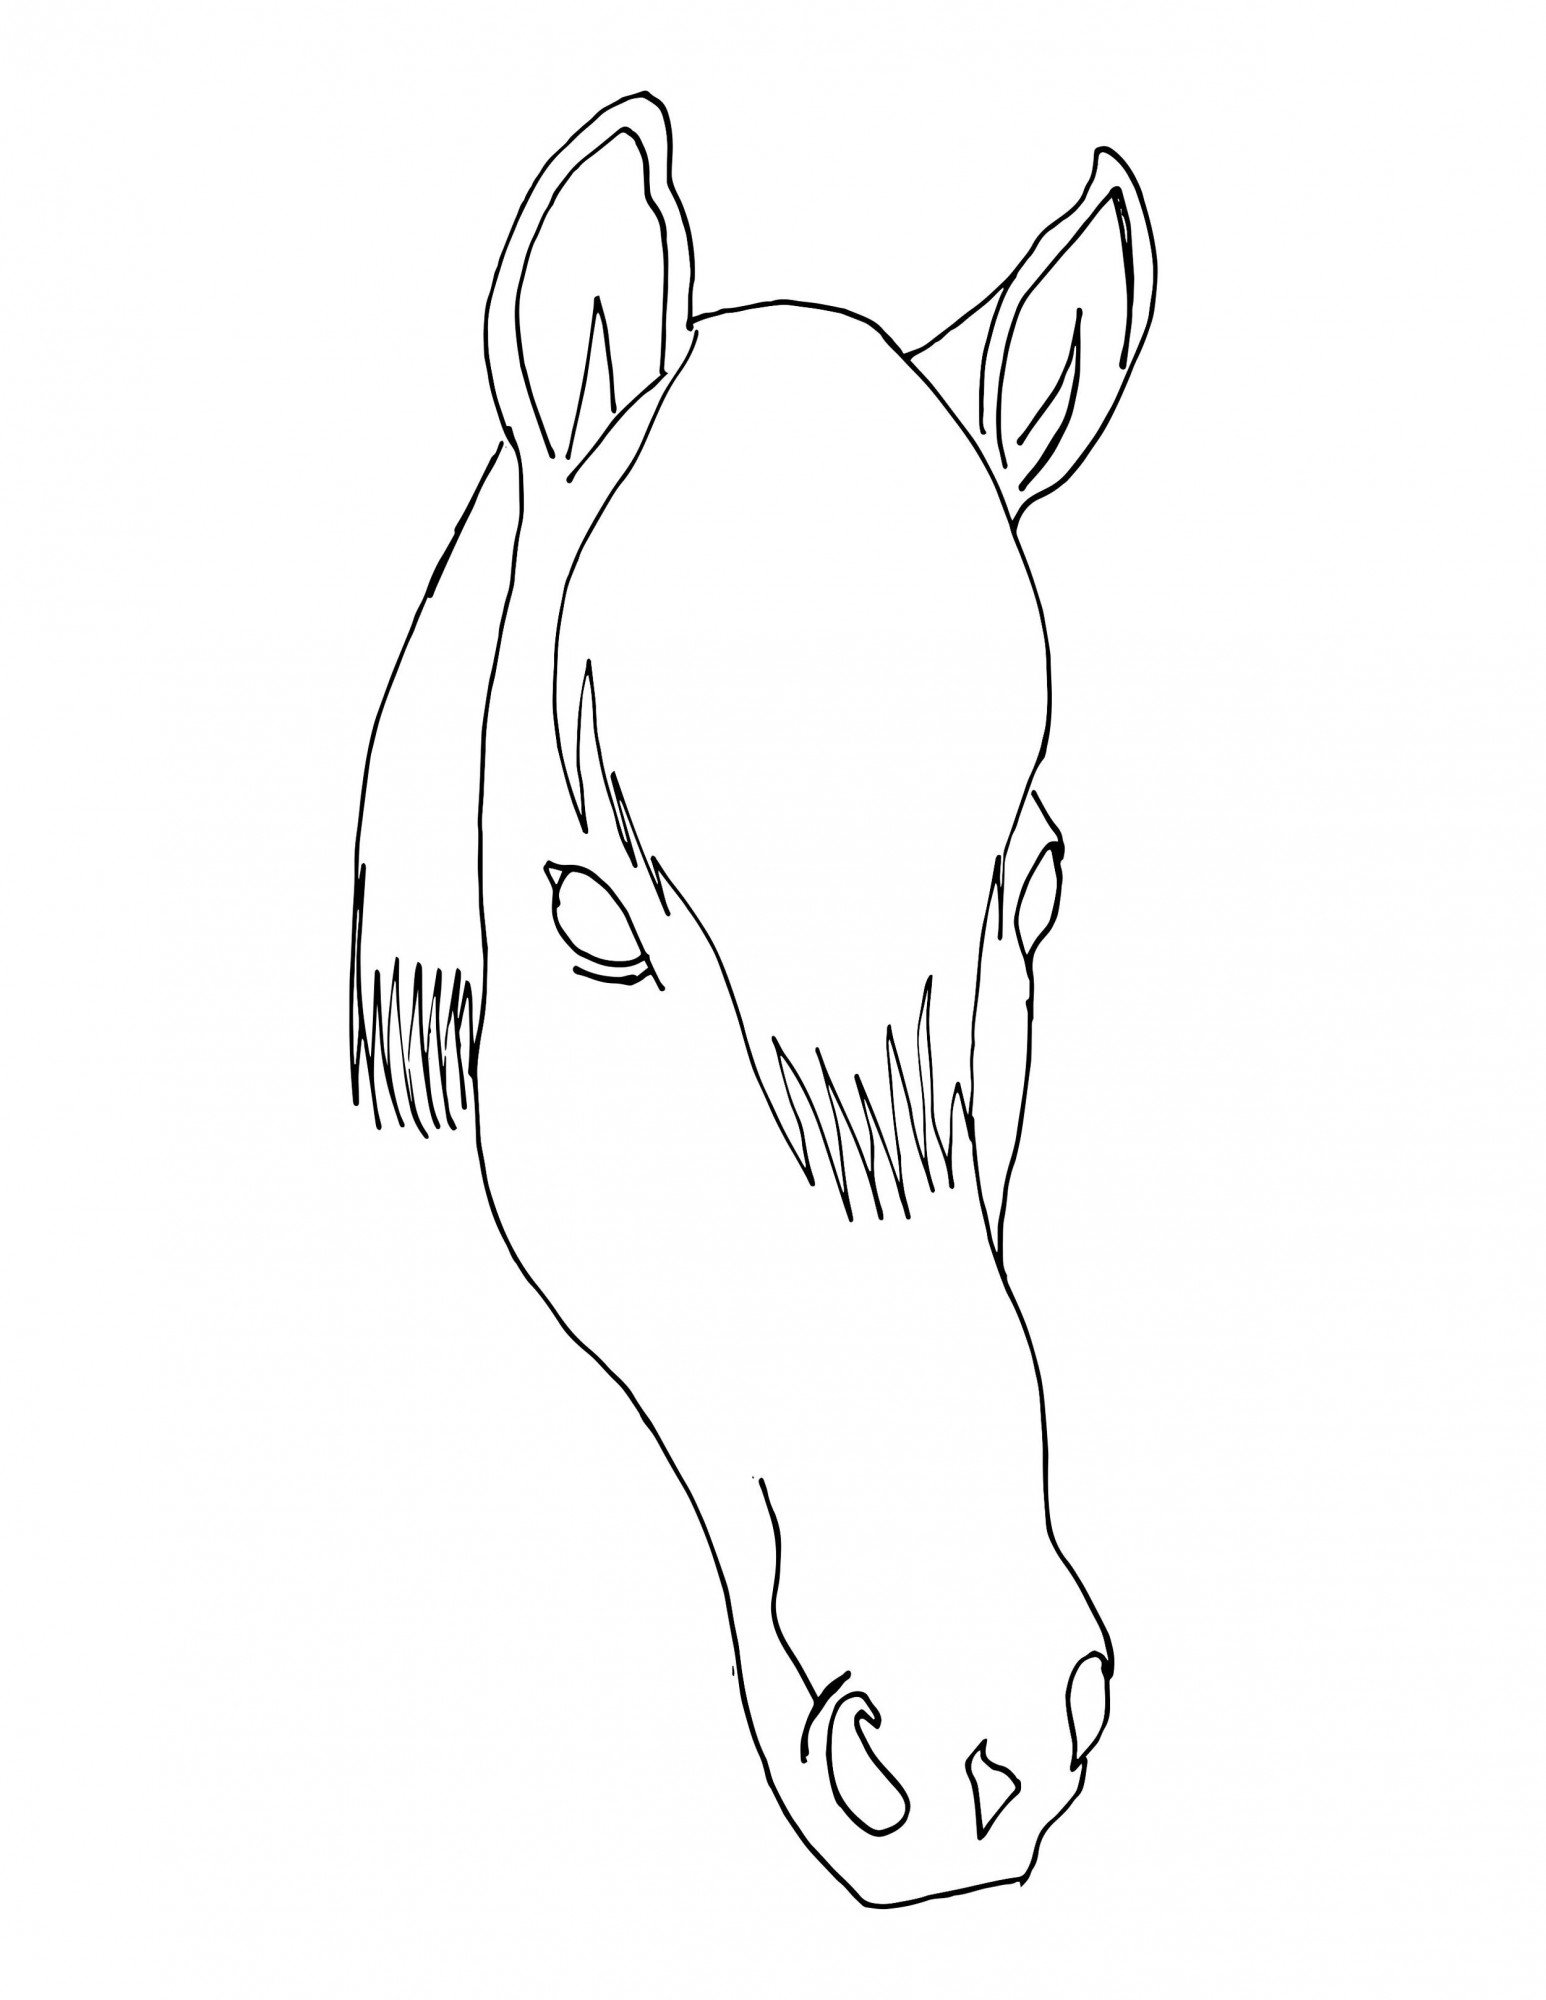 Horse "Bear" - black and white outline for coloring